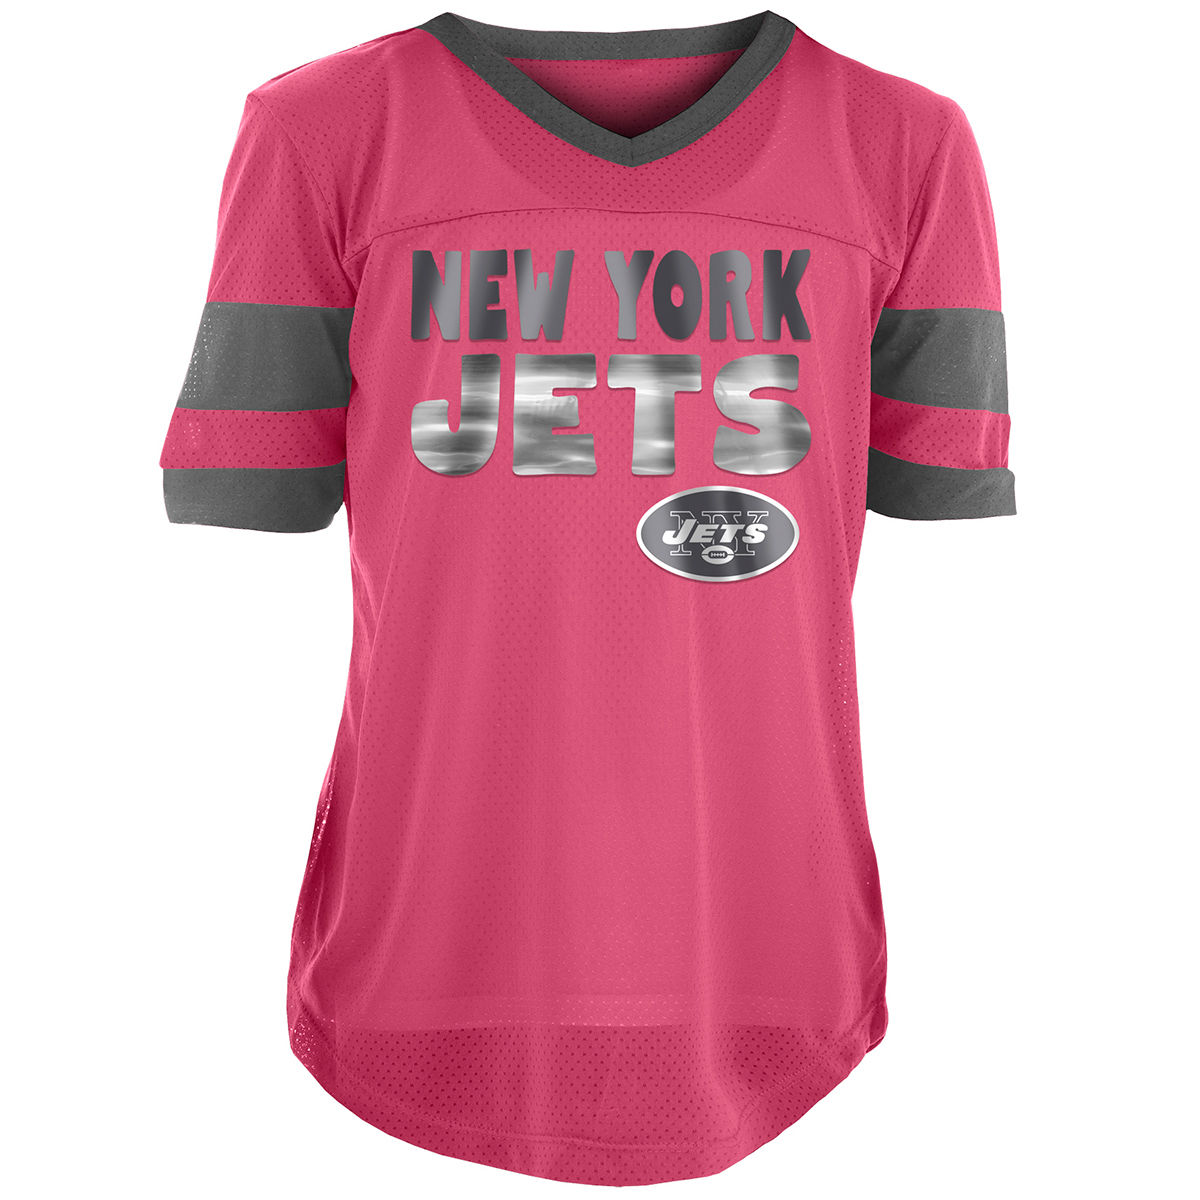 NEW YORK JETS Big Girls' Pink Poly Mesh Short-Sleeve Jersey - Red, 10-12